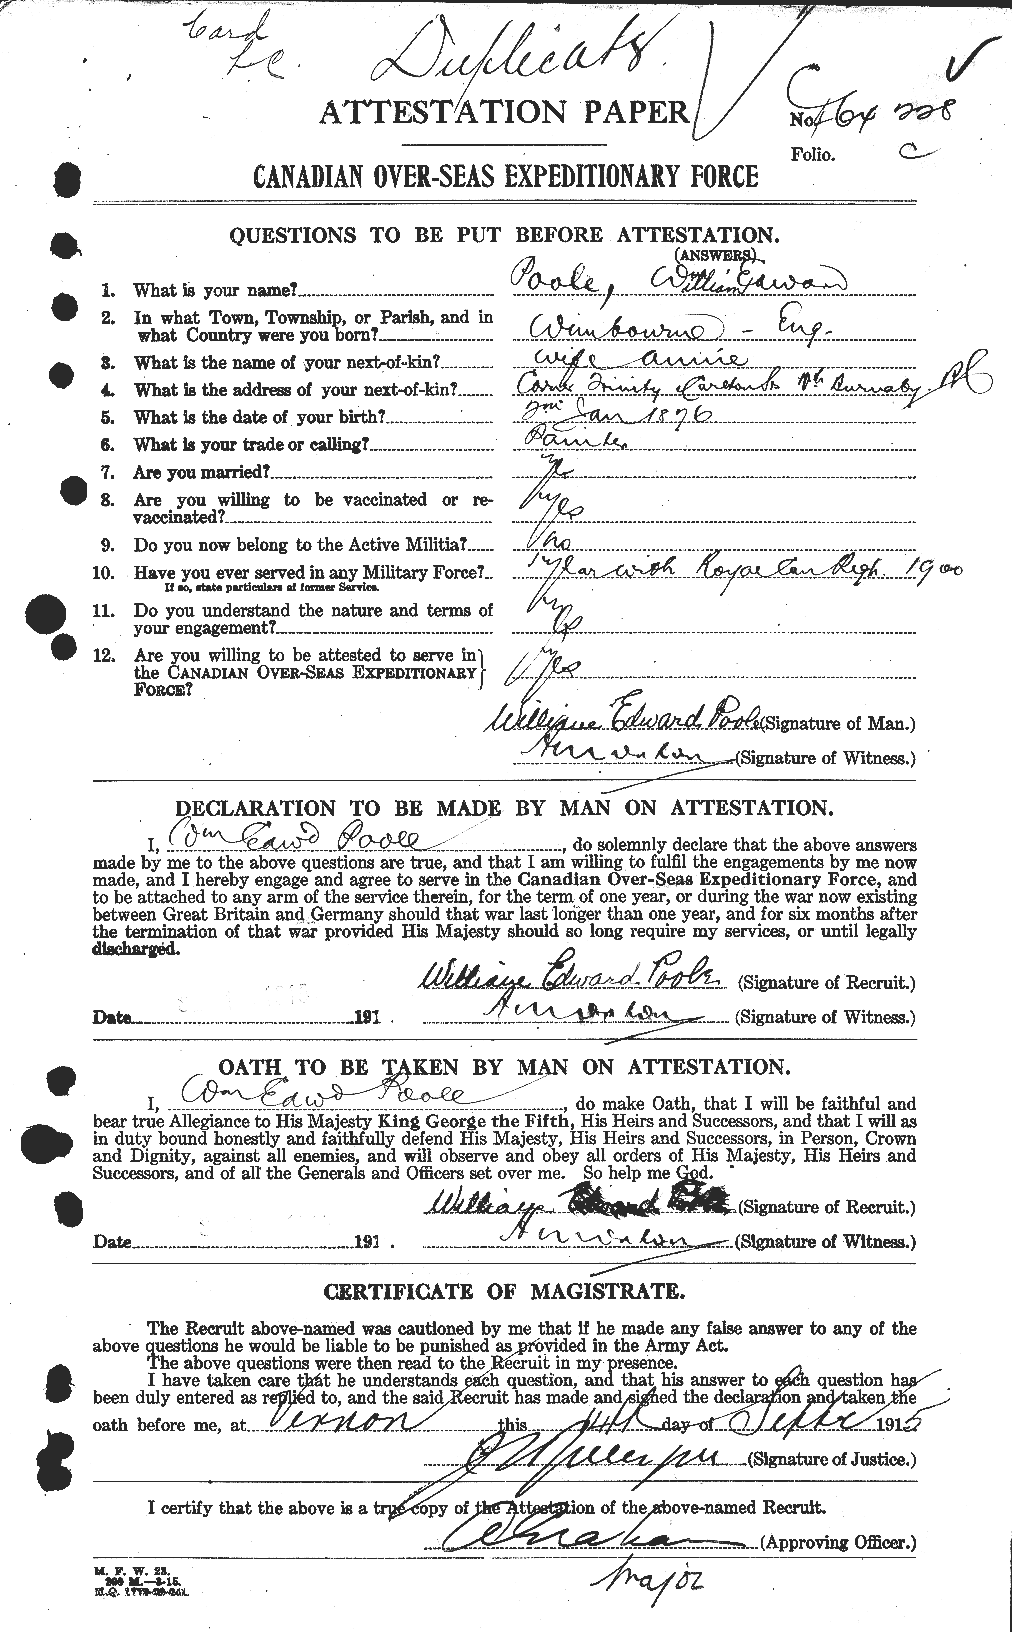 Personnel Records of the First World War - CEF 581943a